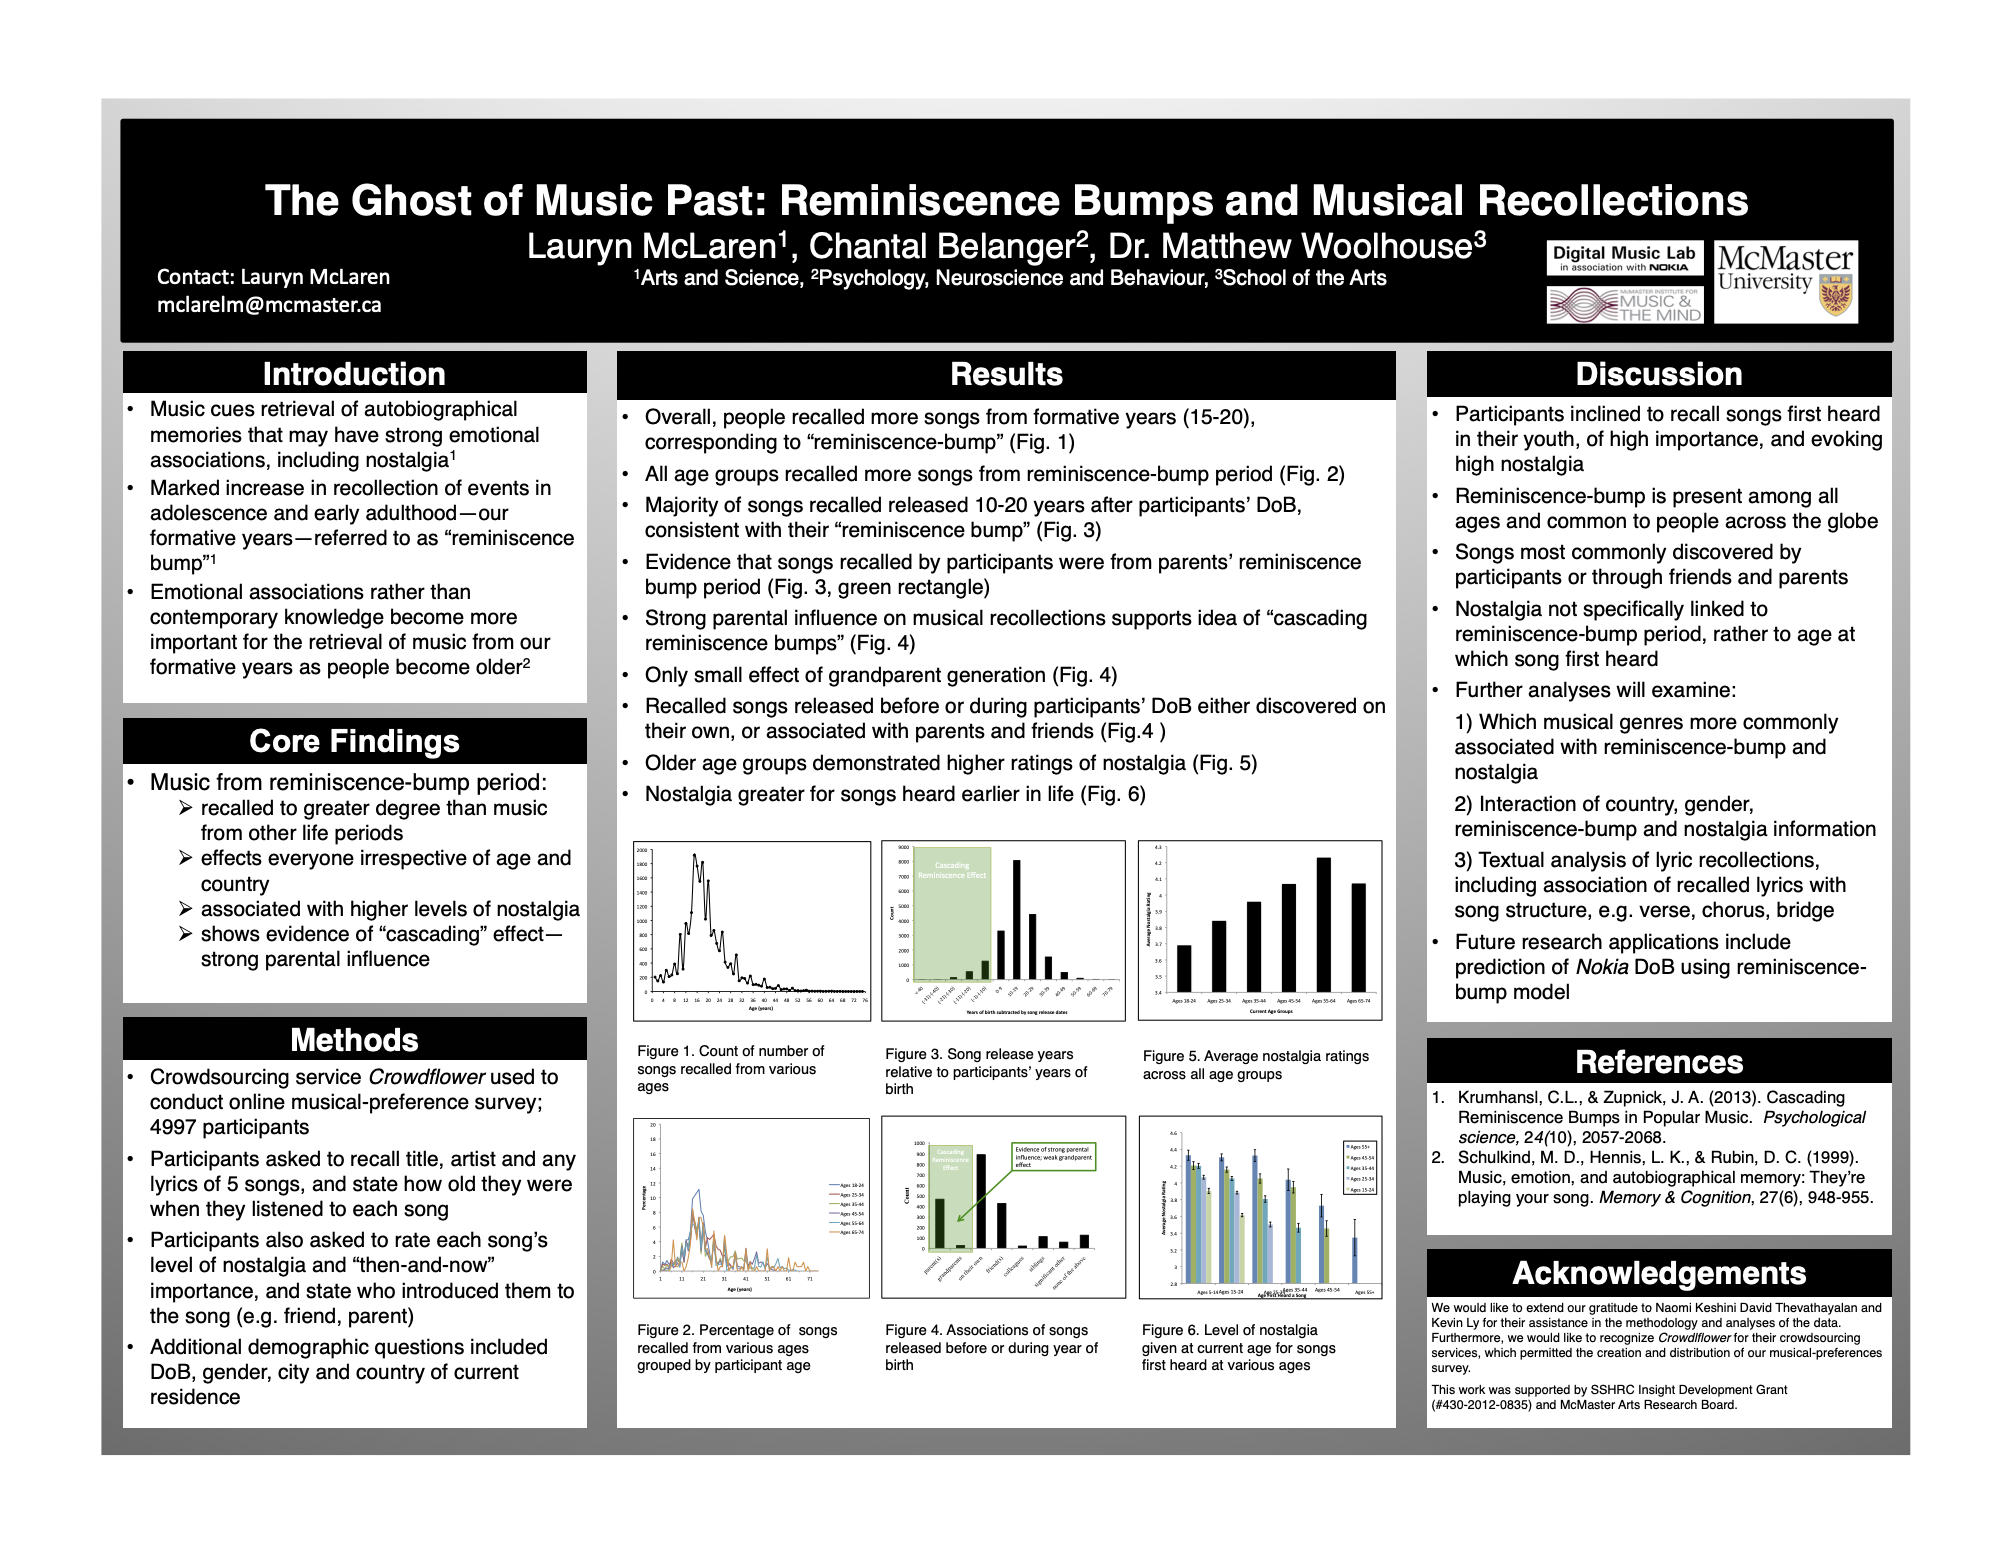 The poster for "The Ghost of Music Past: Reminiscence Bumps and Musical Recollections" by Lauryn McLaren, Chantal Belanger, and Dr. Matthew Woolhouse. 